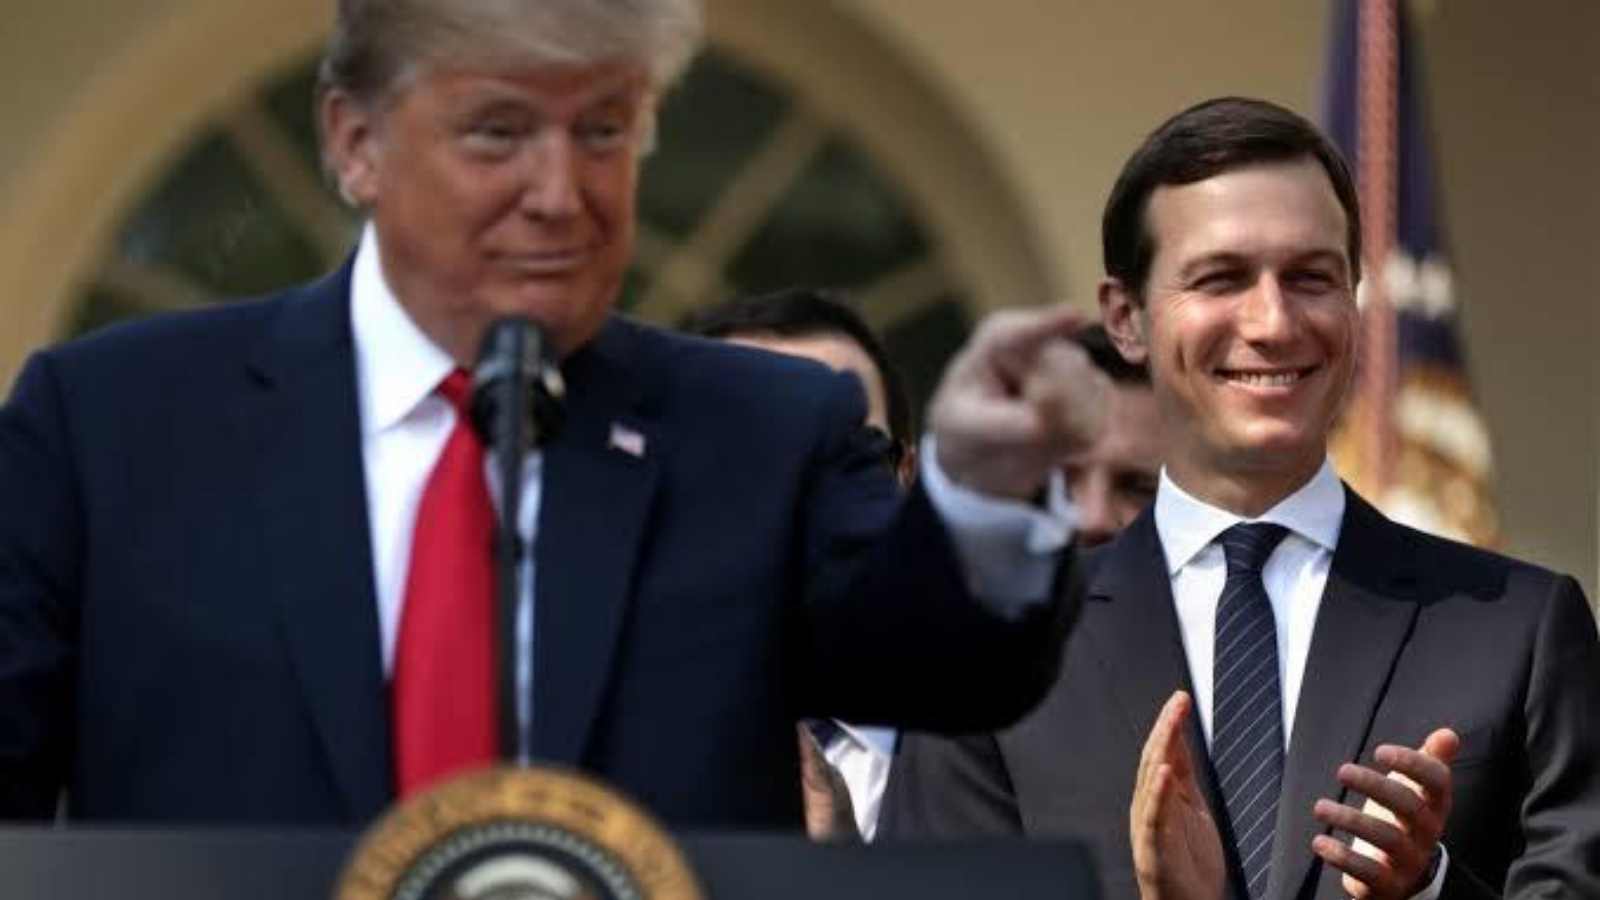 Donald Trump knew about his son in law's cancer surgery even though it was kept a secret by Jared Kushner